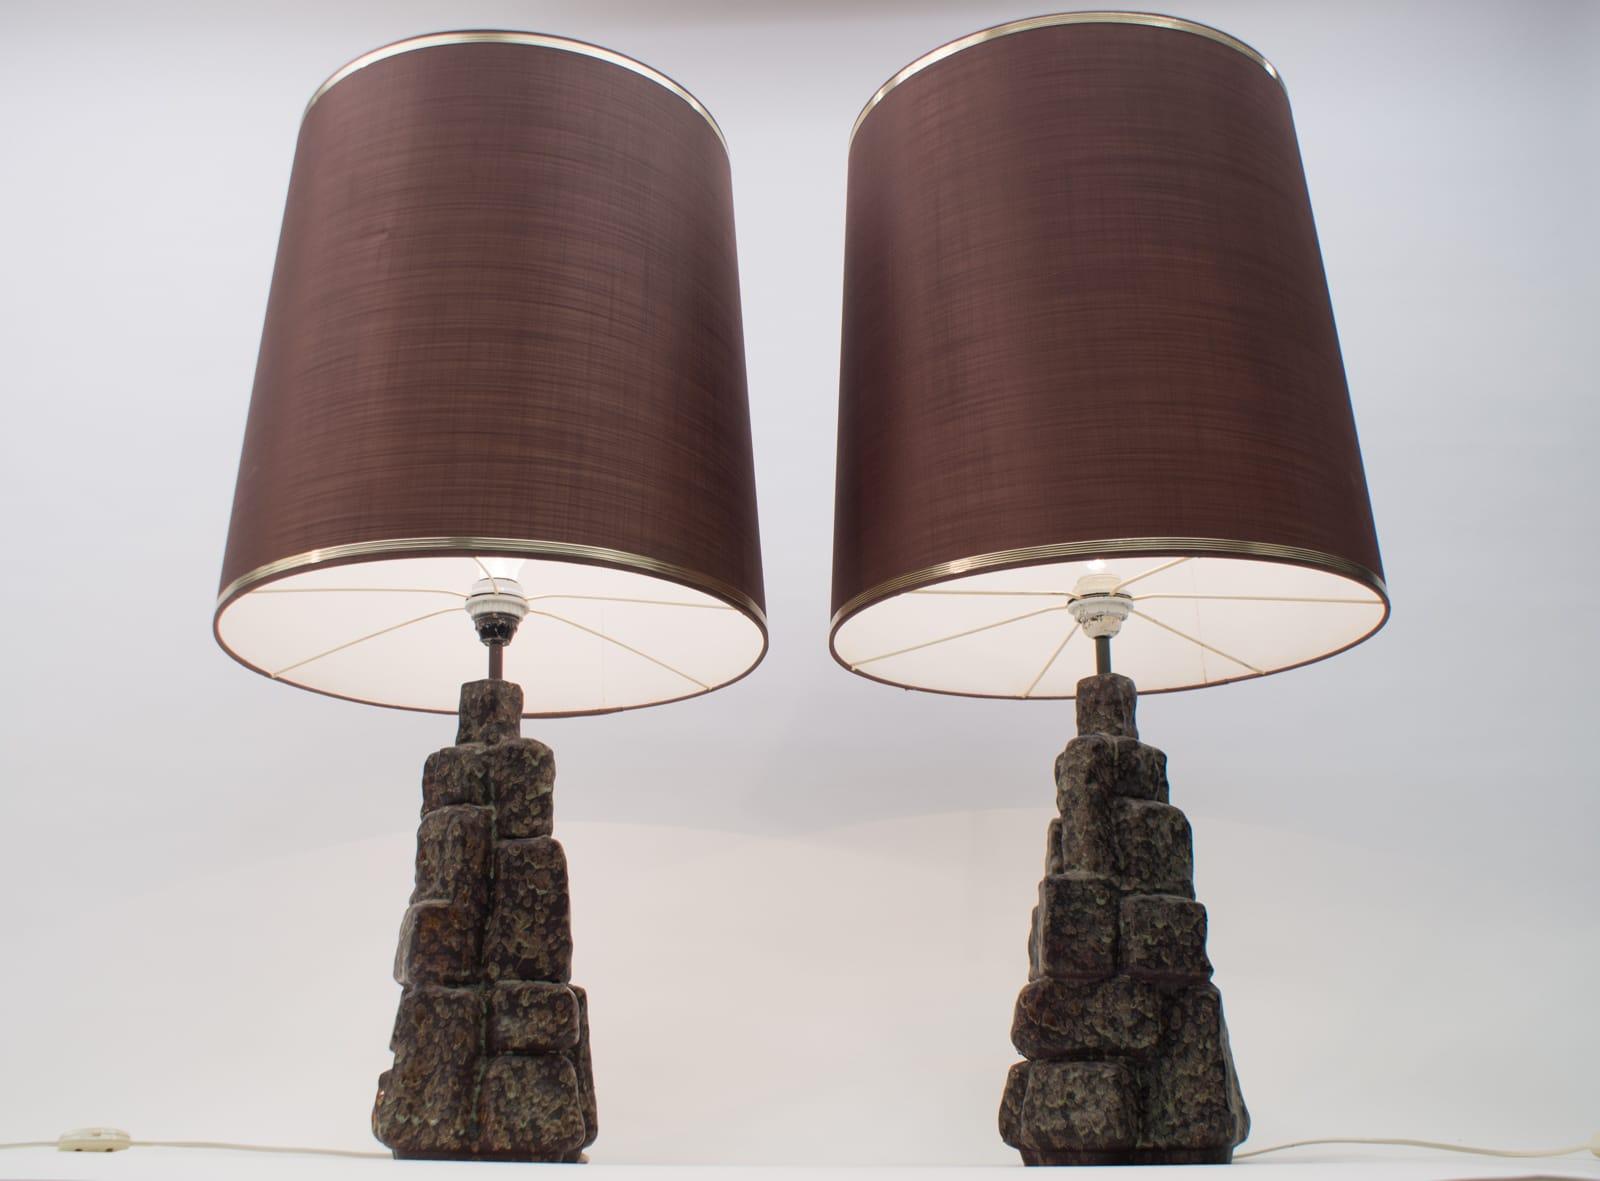 Metal Pair of Large Ceramic Table Lamps in the Shape of Rocks, 1960s Italy